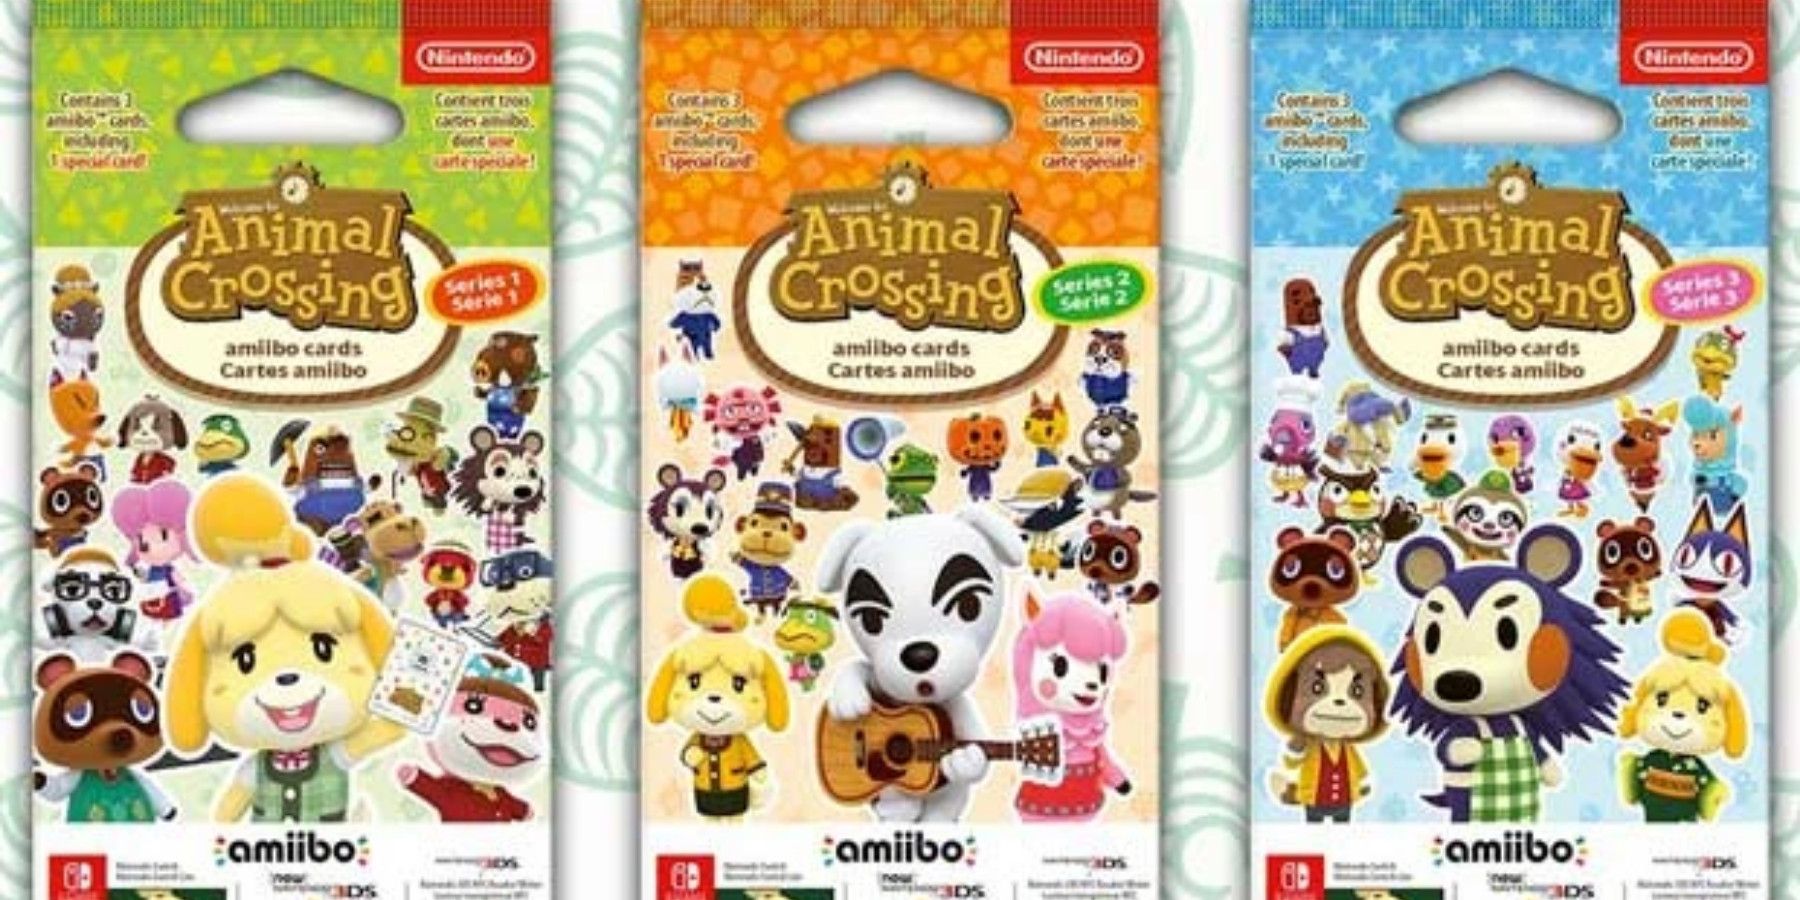 Lucky Animal Crossing: New Horizons Fan Opens Amiibo Card
Pack Full of Dreamies